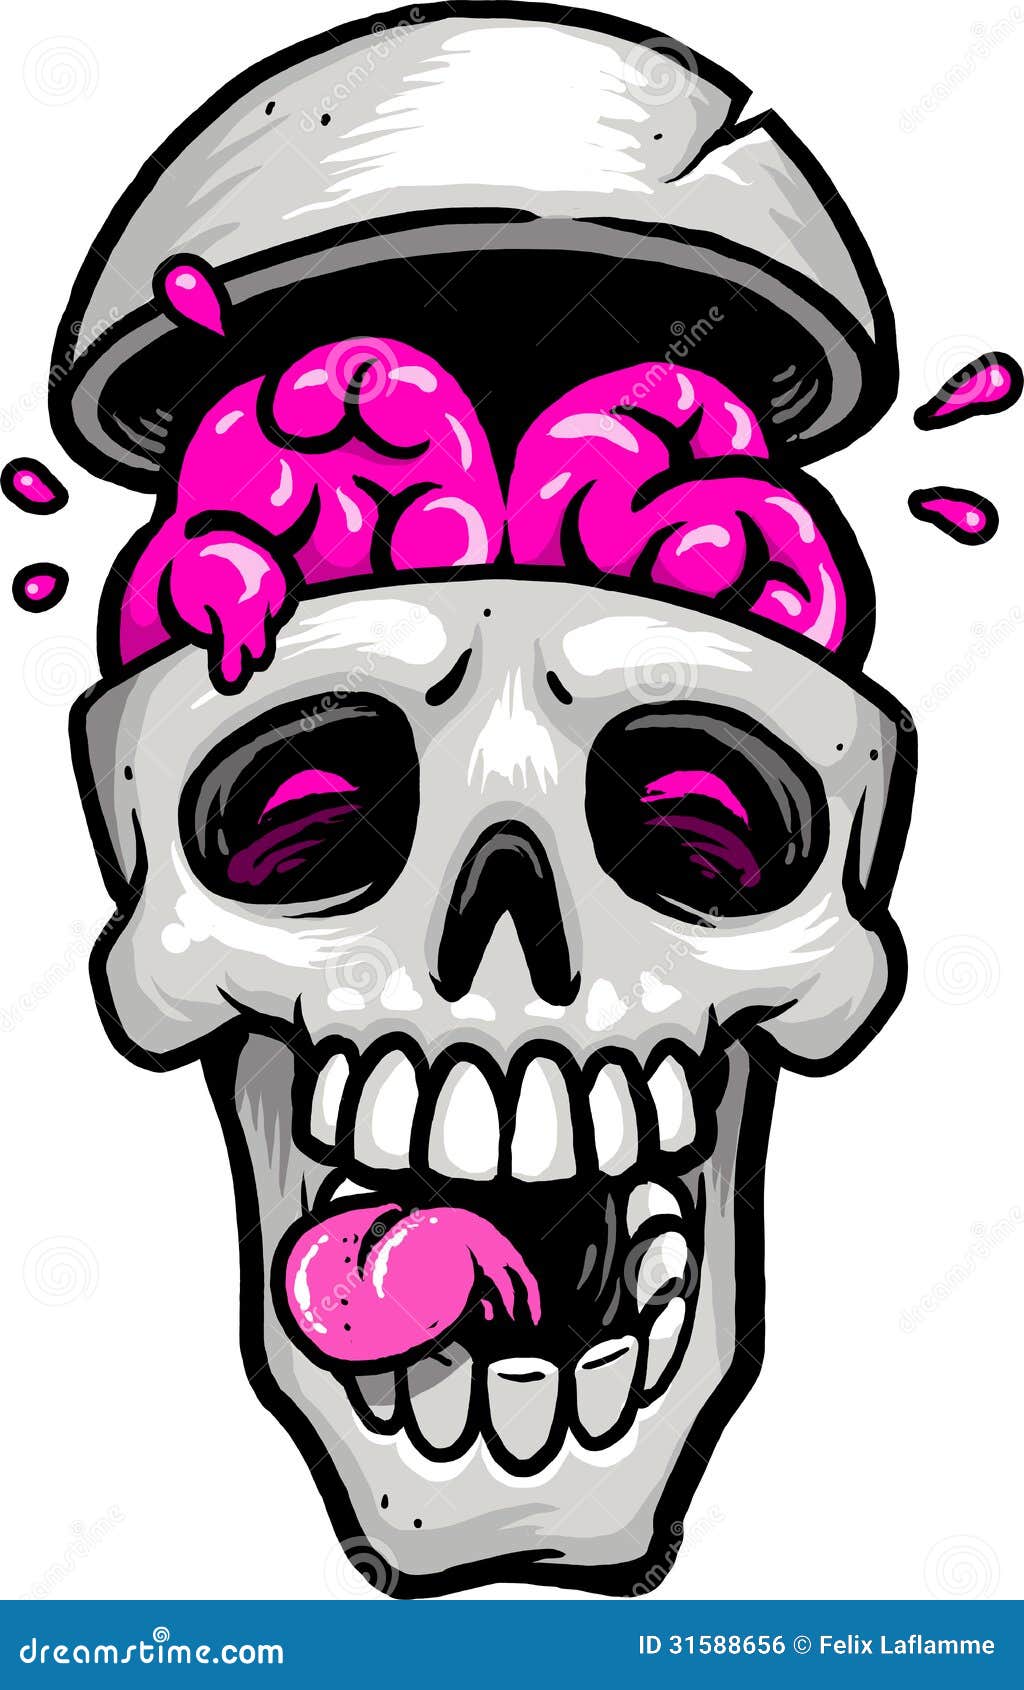 Skull with brain out stock illustration. Illustration of 